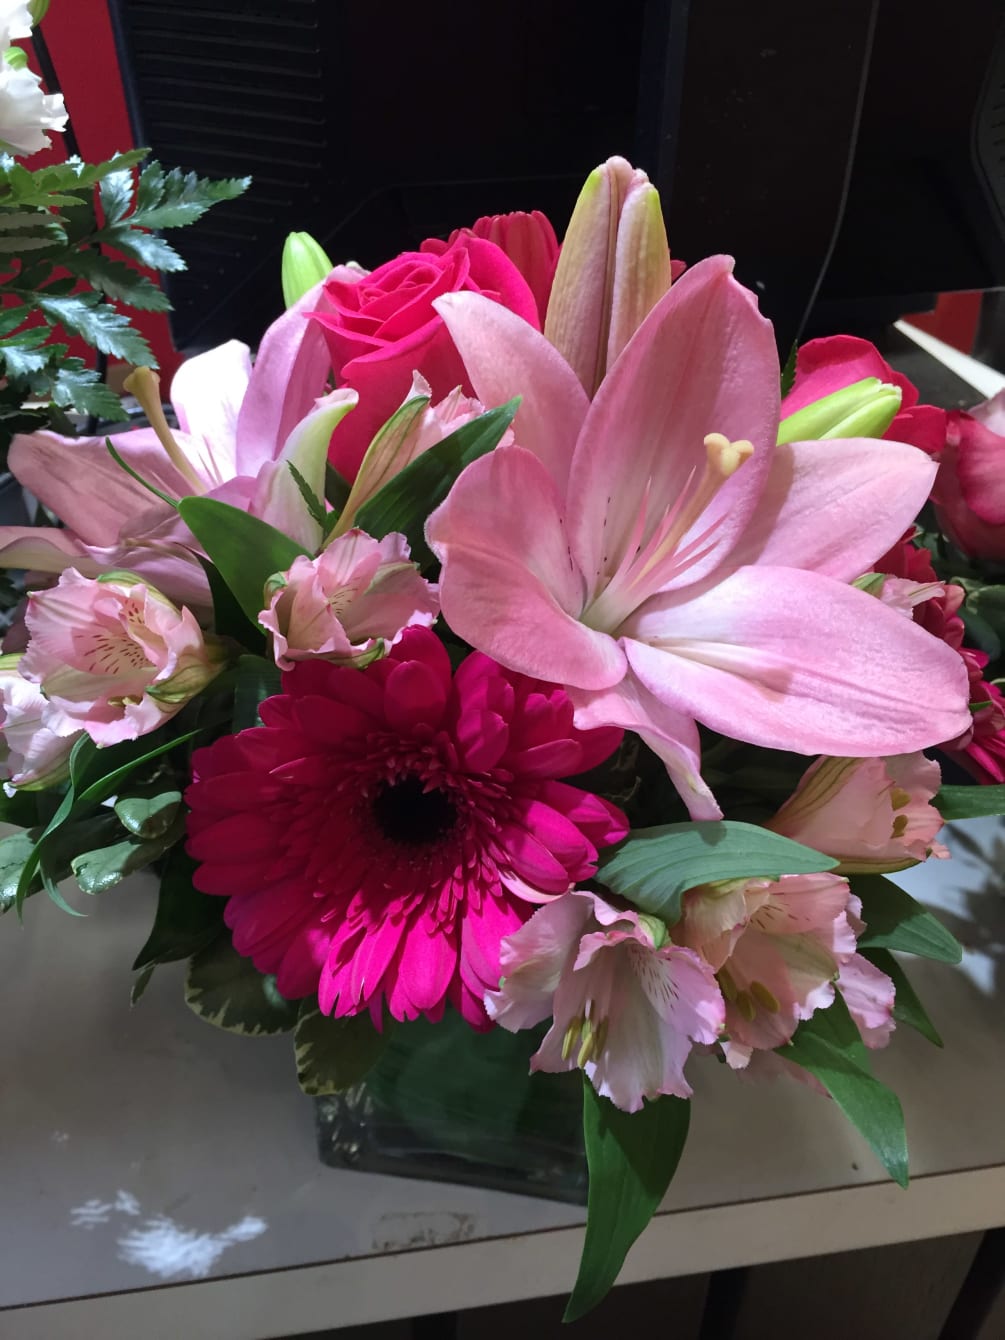 Pink shades of the most beautiful pink flowers. Long lasting too! Arranged